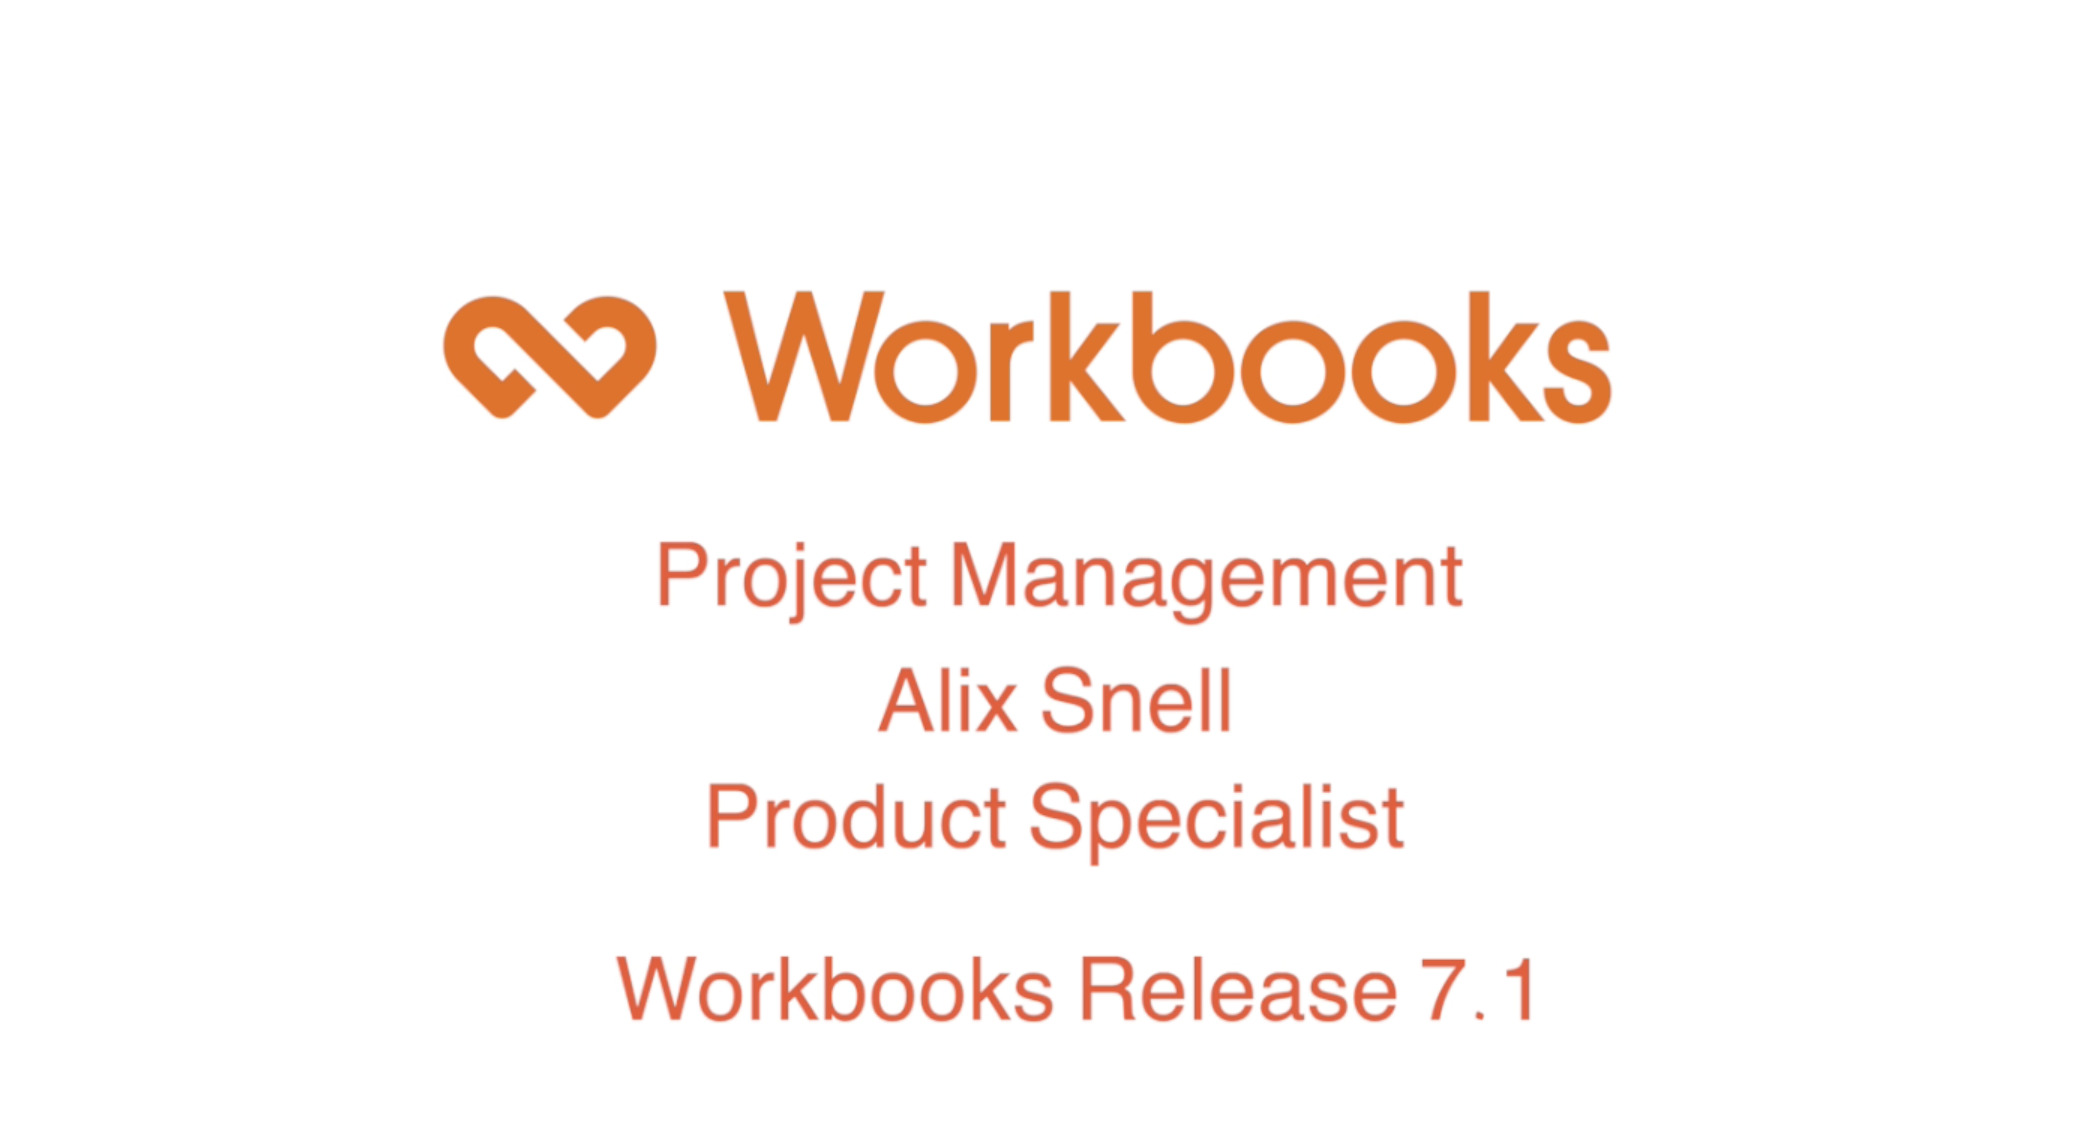 Workbooks Release 7.1 – Project Management featured image